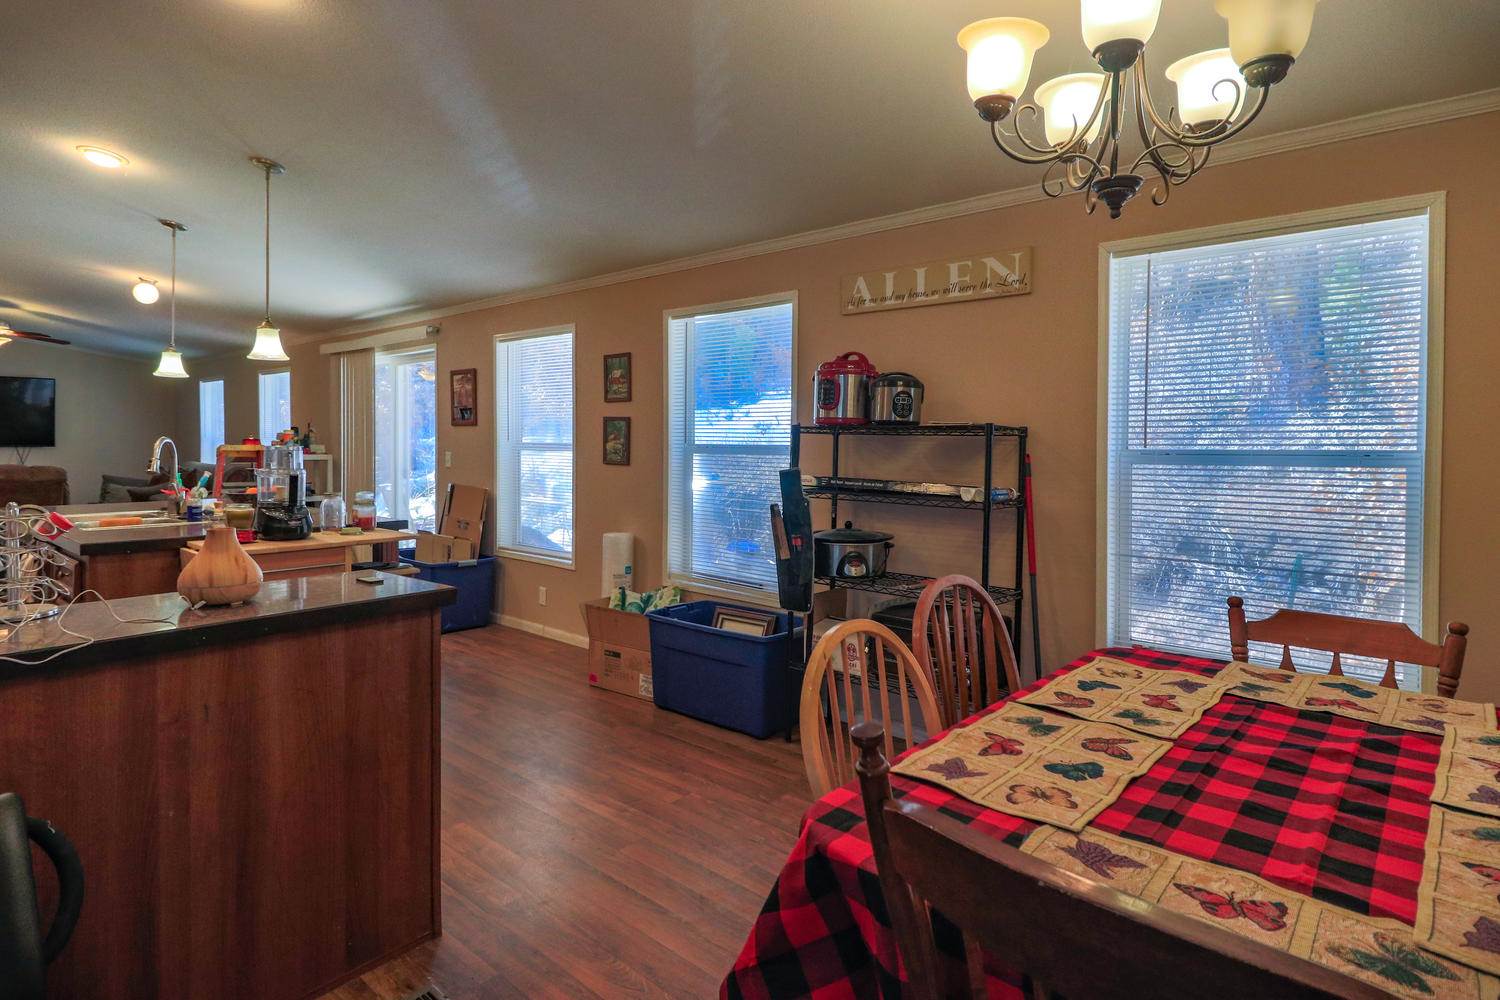 187 WEASEL Drive, Pagosa Springs, CO 81147